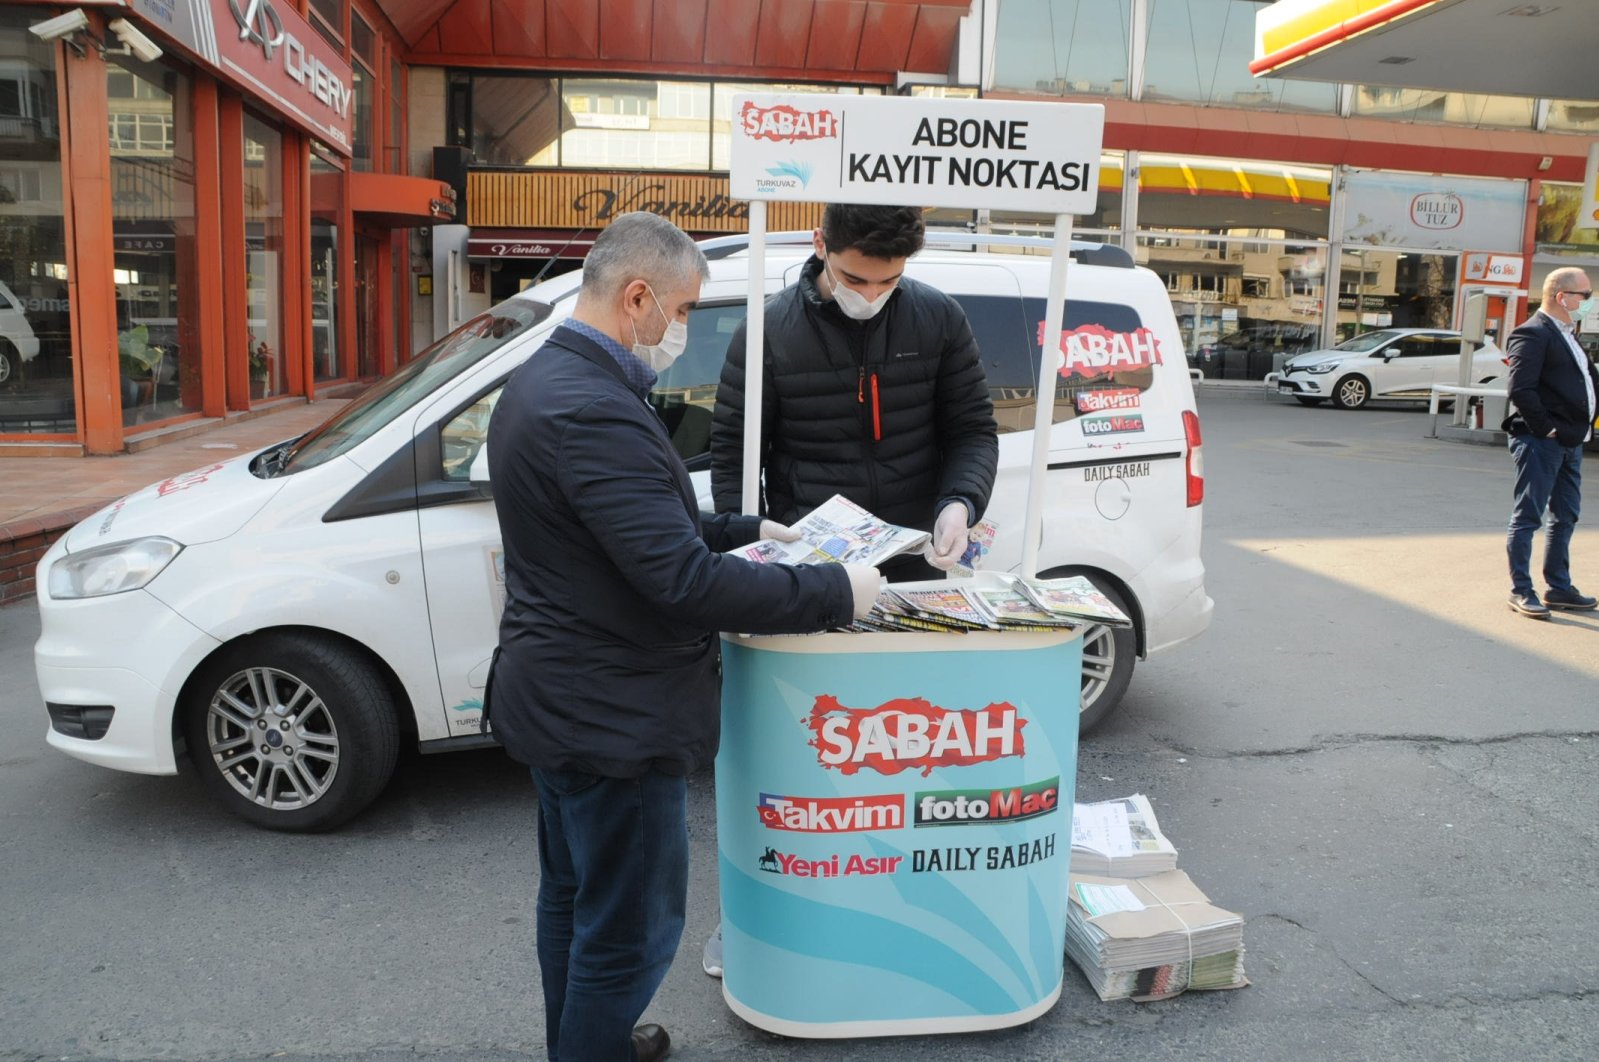 A man reads a newspaper at a subscription stand for Turkuvaz Media newspapers in Istanbul, Turkey, April 13, 2020. (PHOTO BY MUSTAFA KAYA)